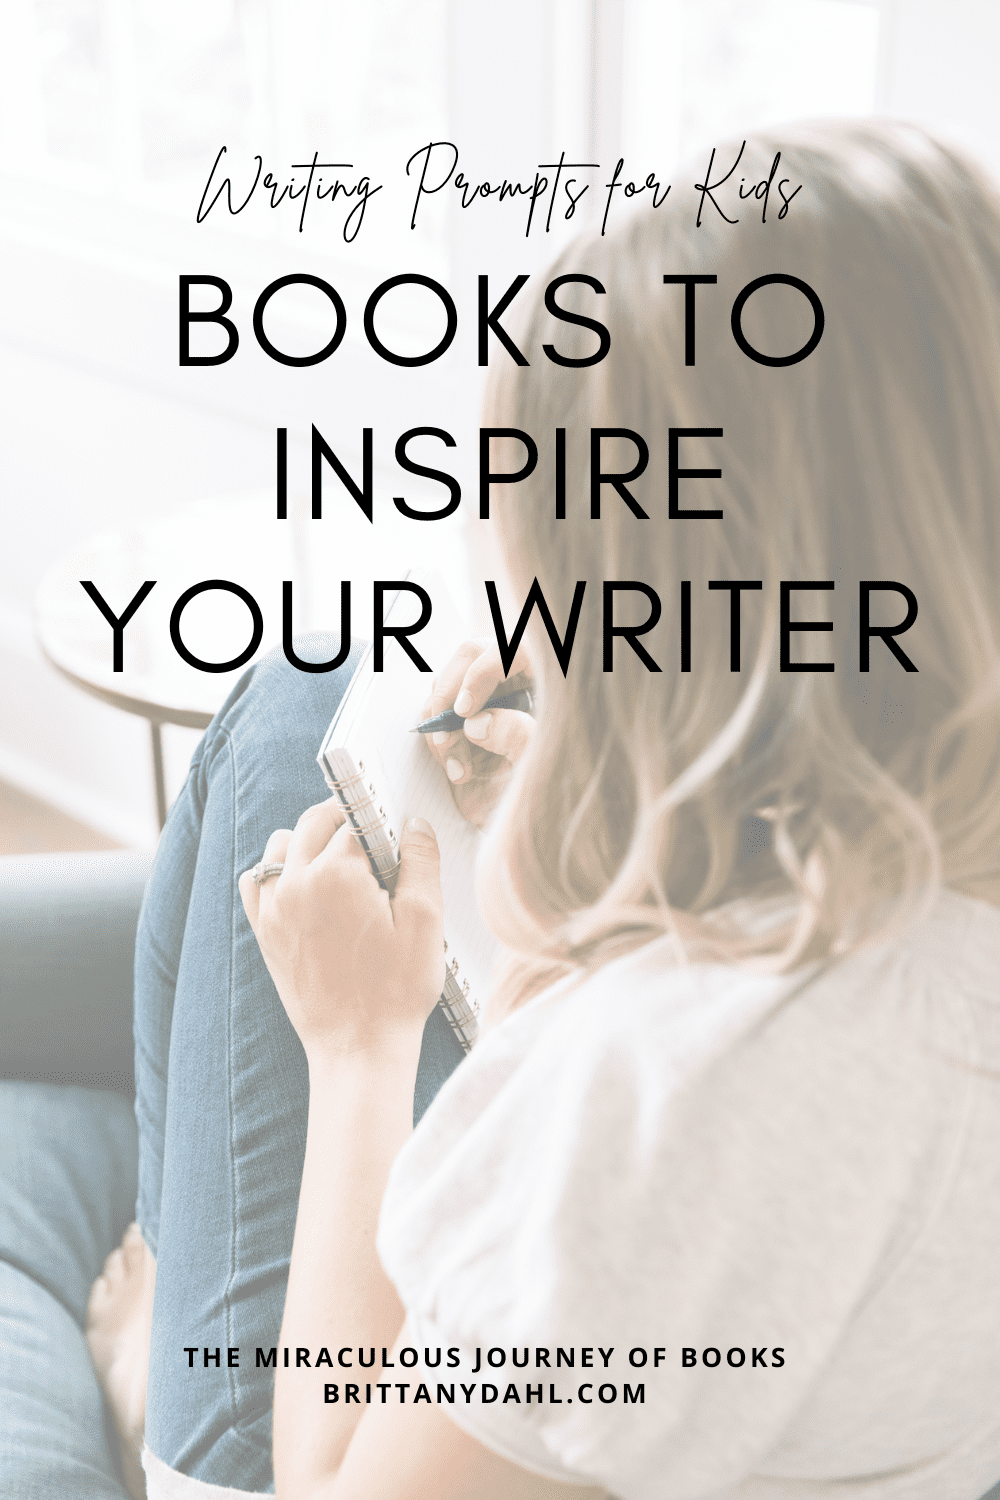 Writing Prompts for Kids: Books to Inspire Your Writer by The Miraculous Journey of Books at Brittanydahl.com. Image of young girl sitting in a chair with a writing notebook on her lap. She is writing with a pen.